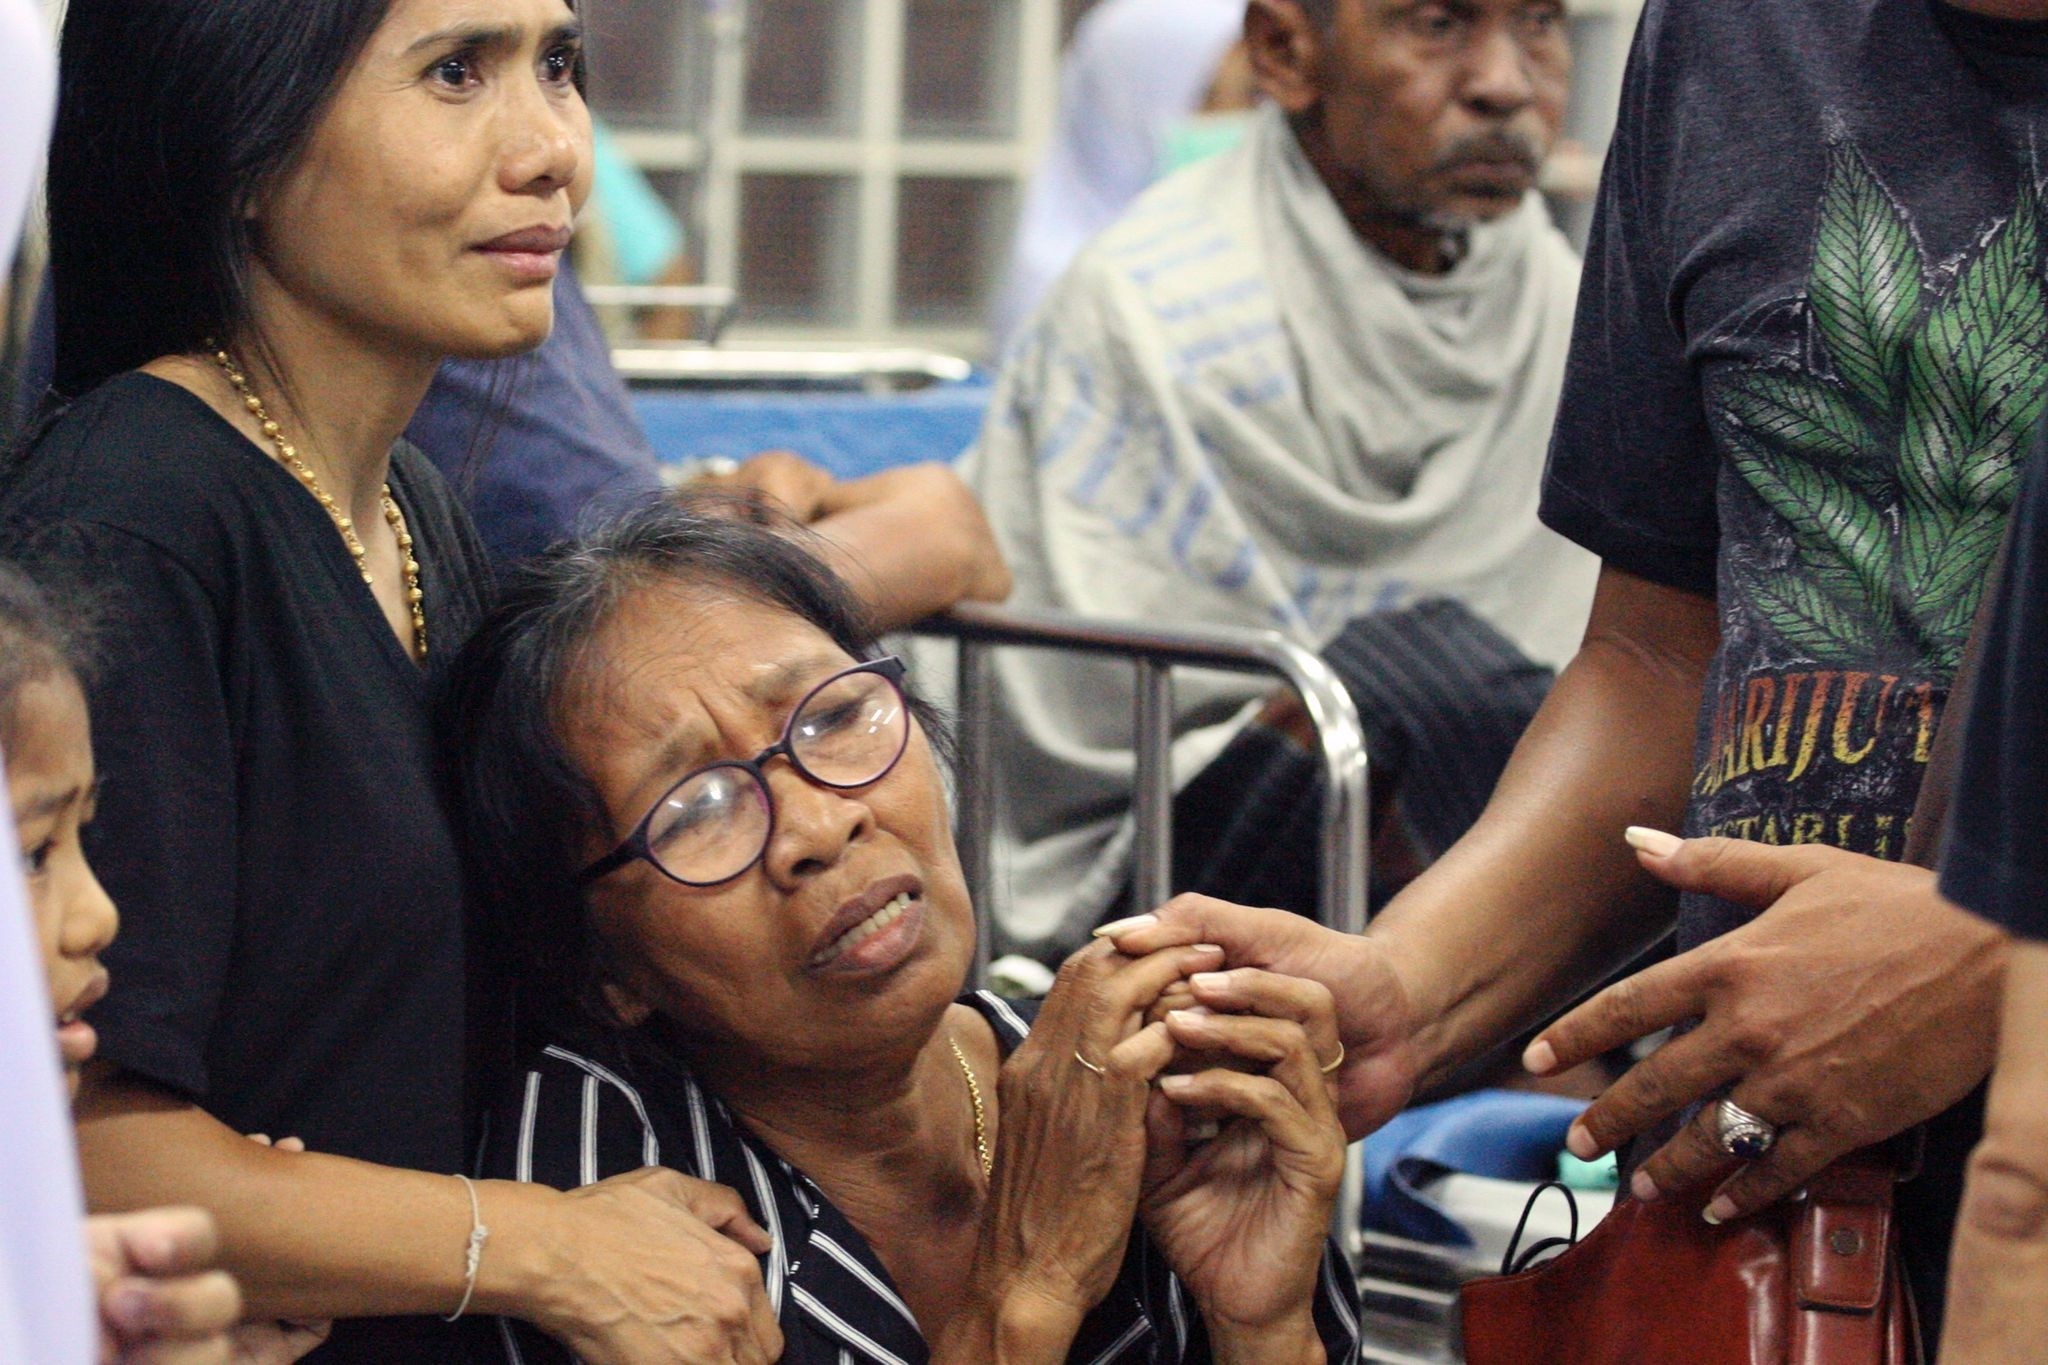 Relatives of a victim injured in a bombing react at a hospital in the southern Thai province of Pattani on October 24, 2016. (AFP Photo)